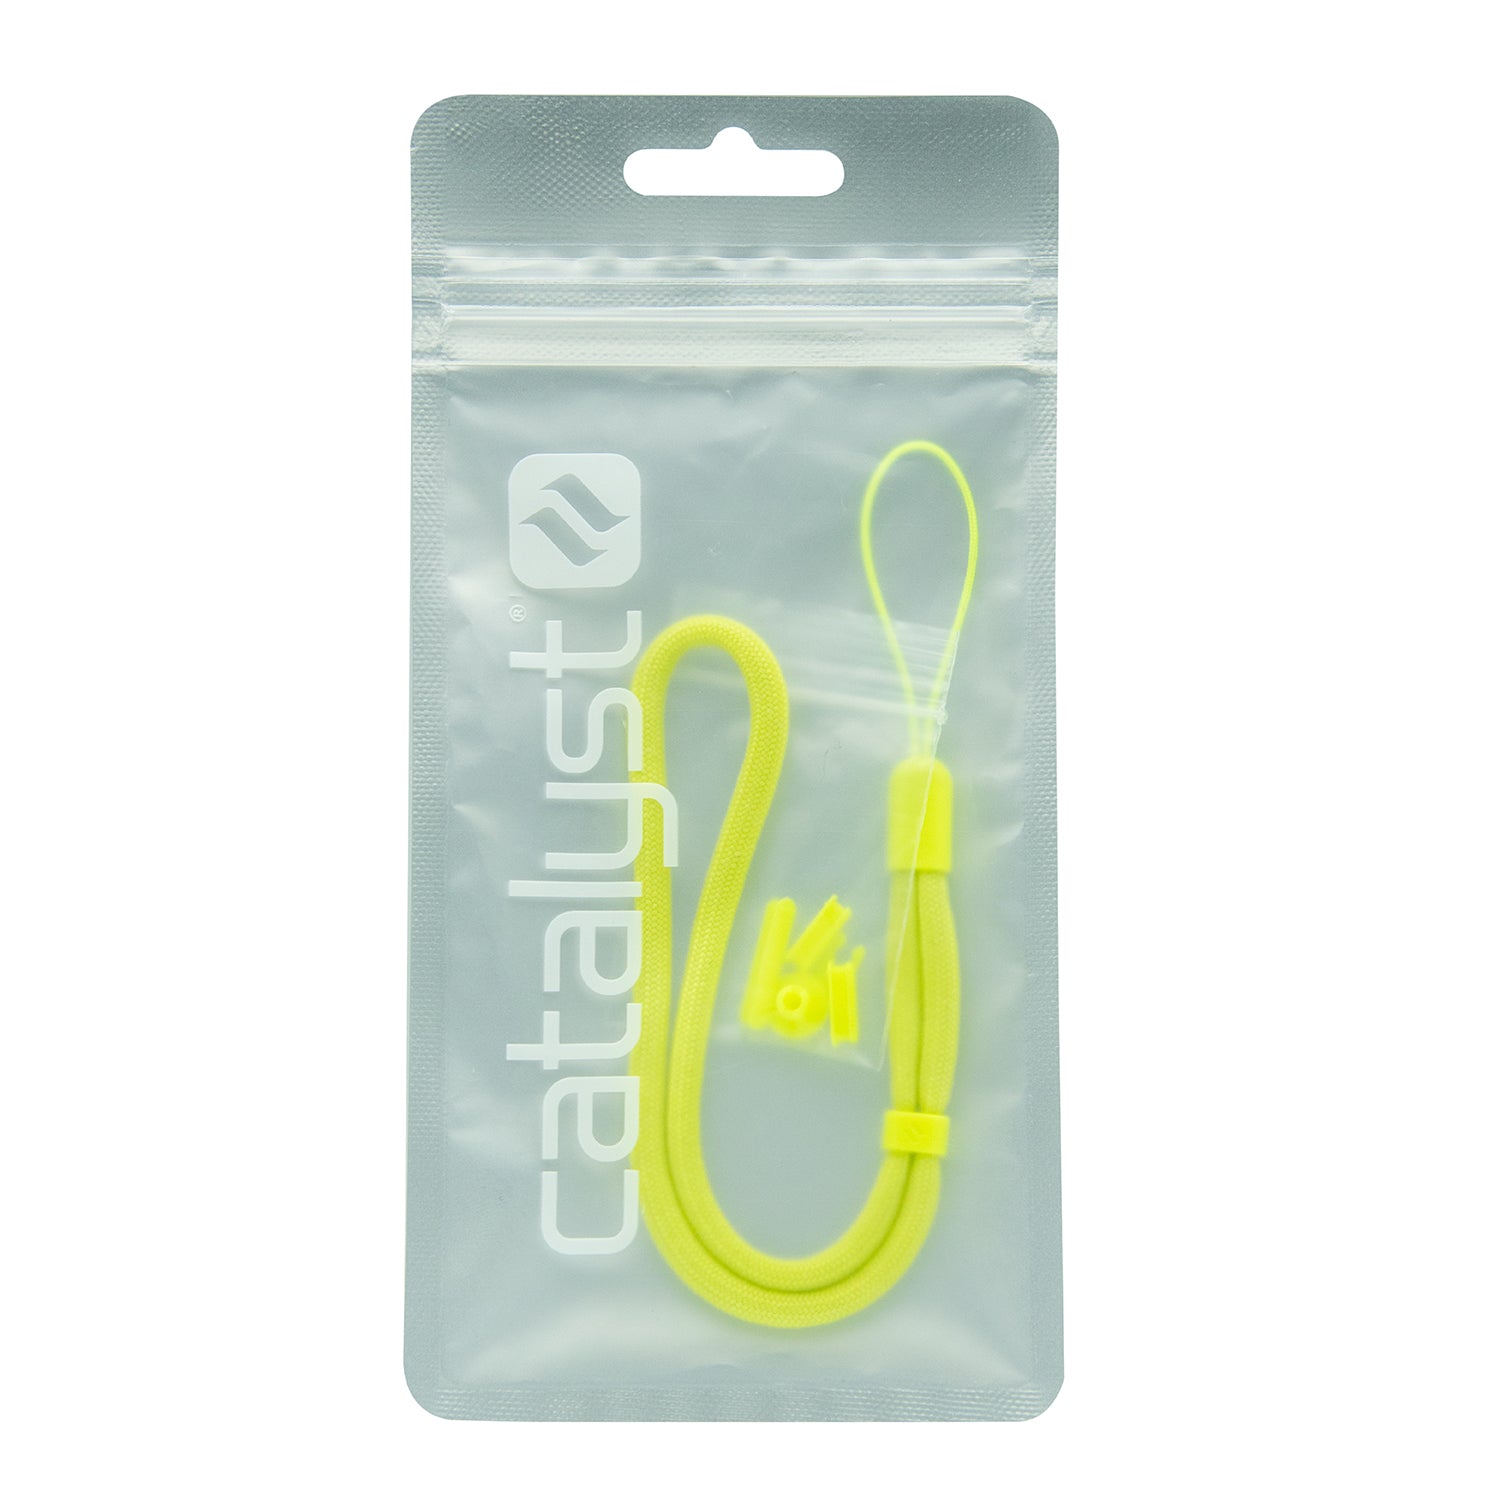 catalyst colored lanyard & buttons neon yellow inside the packaging